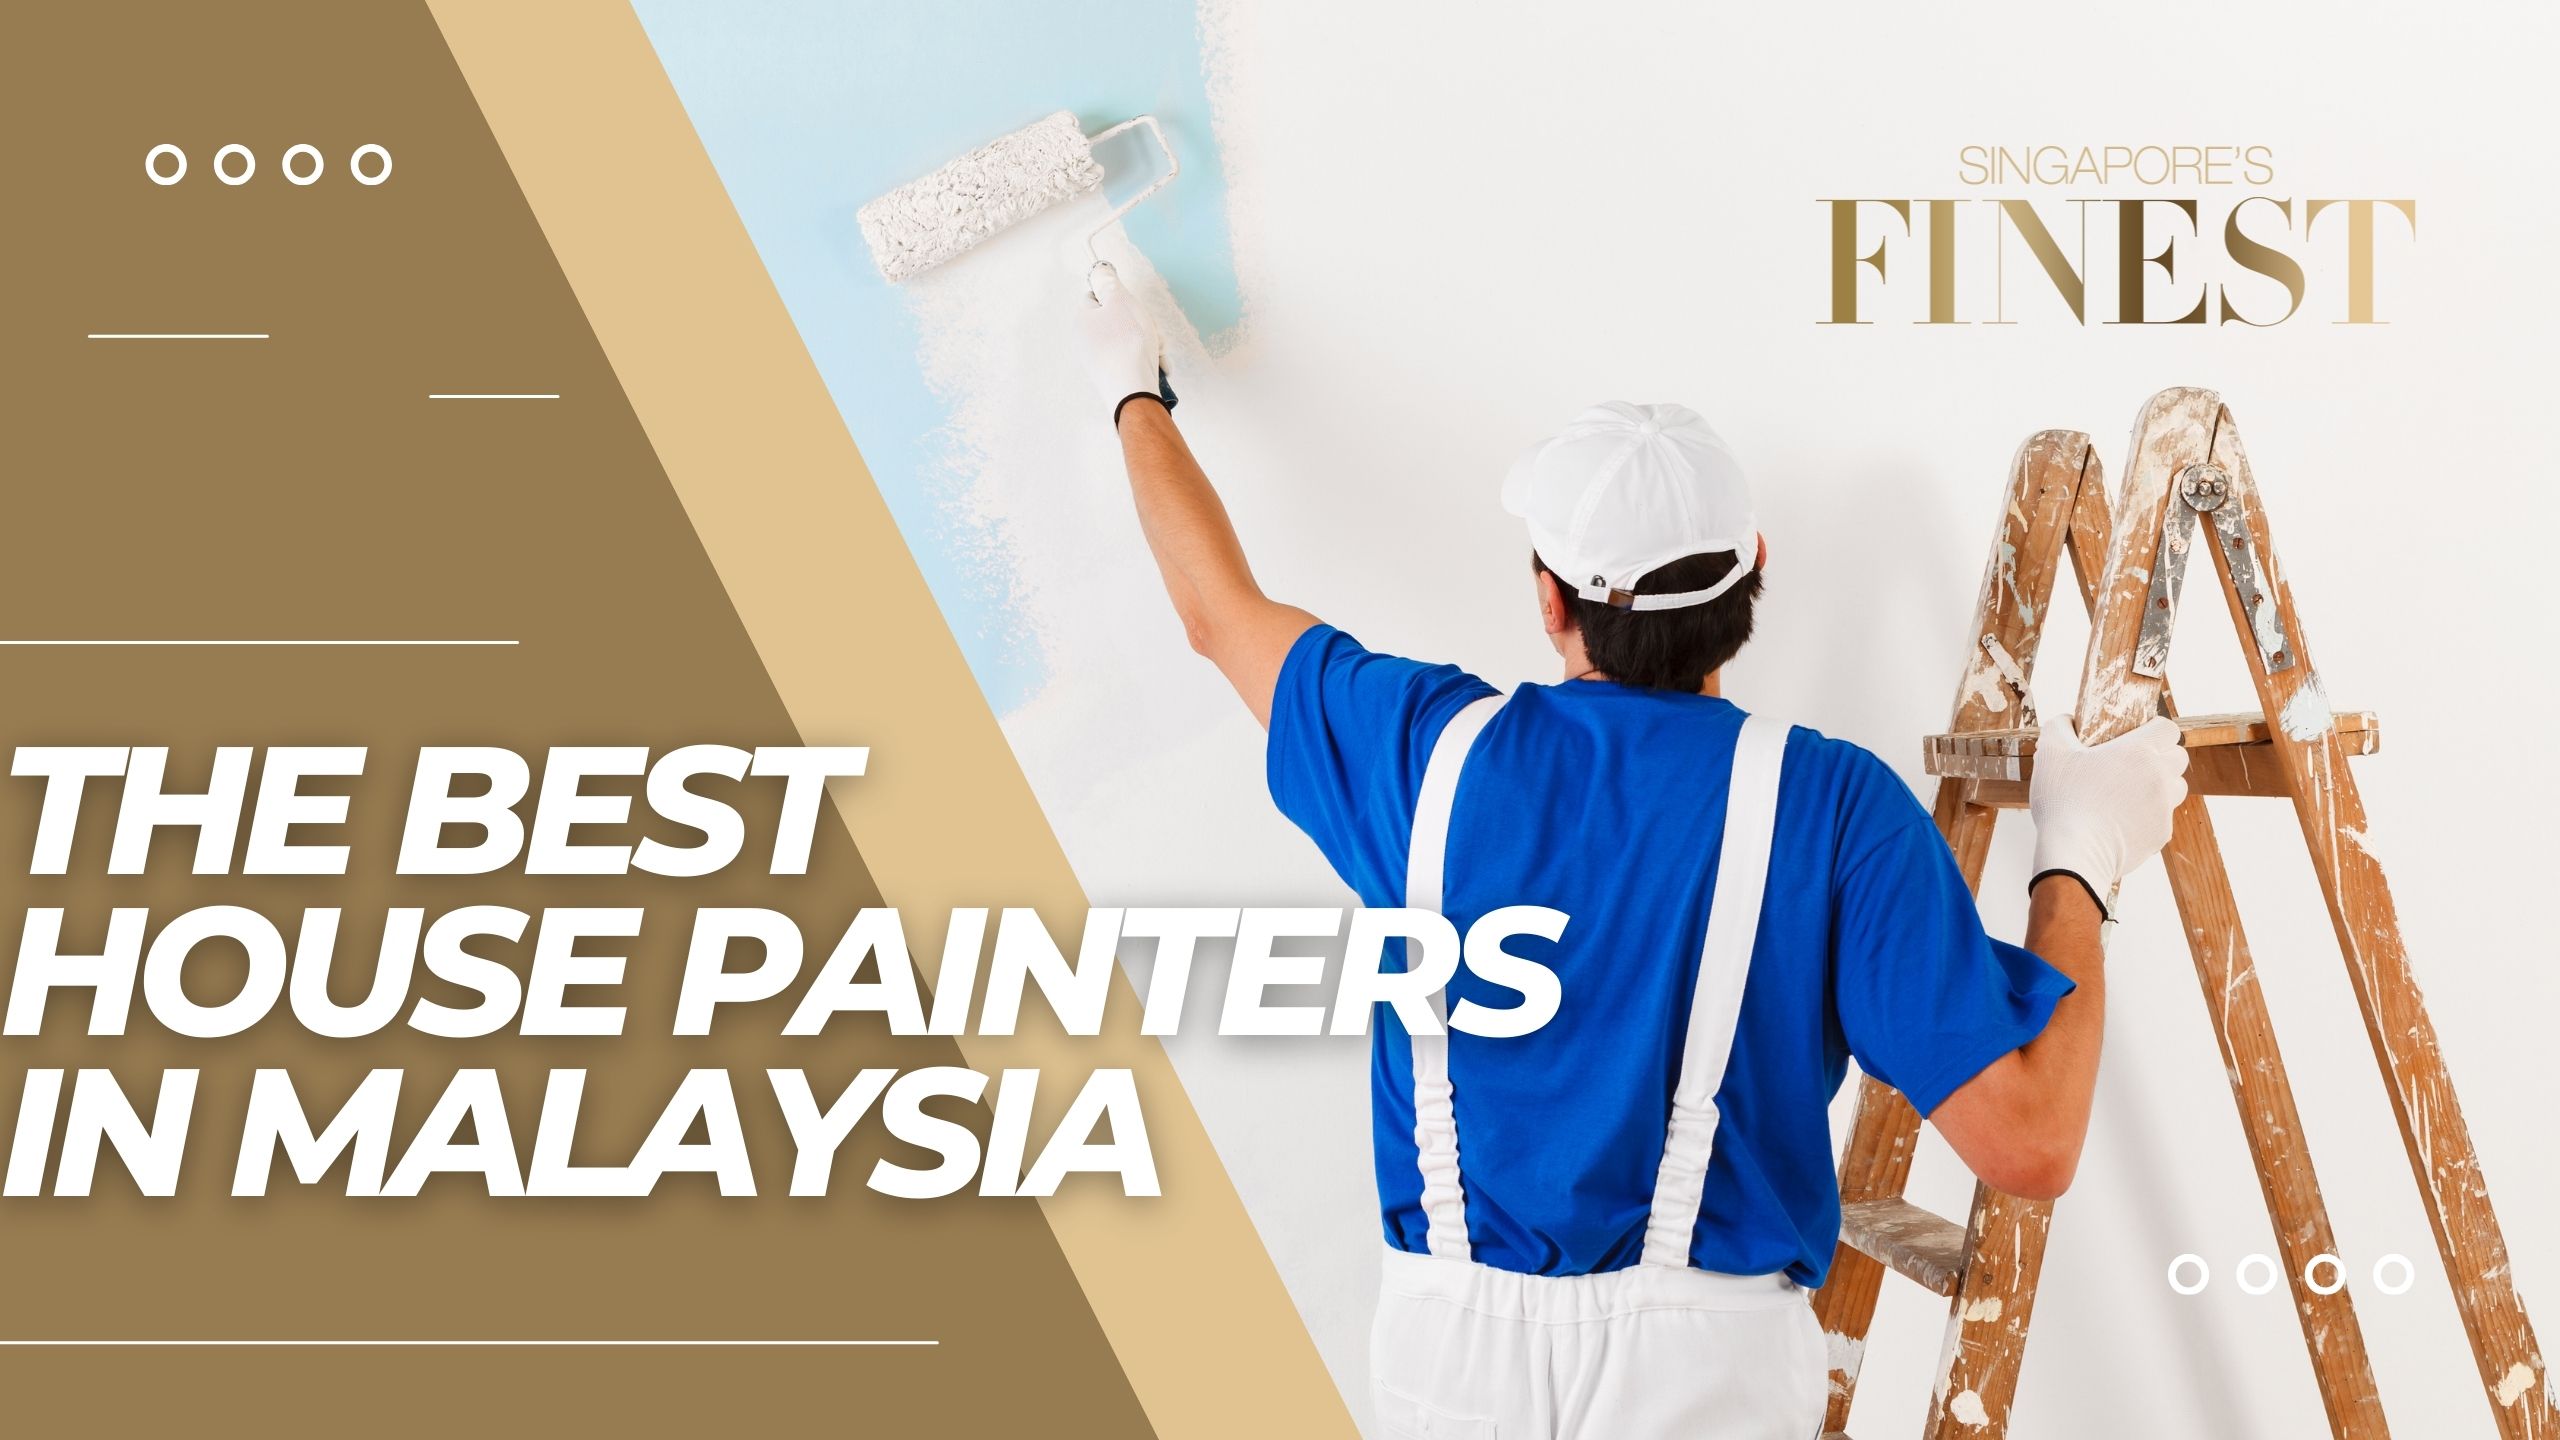 The Finest House Painters in Malaysia